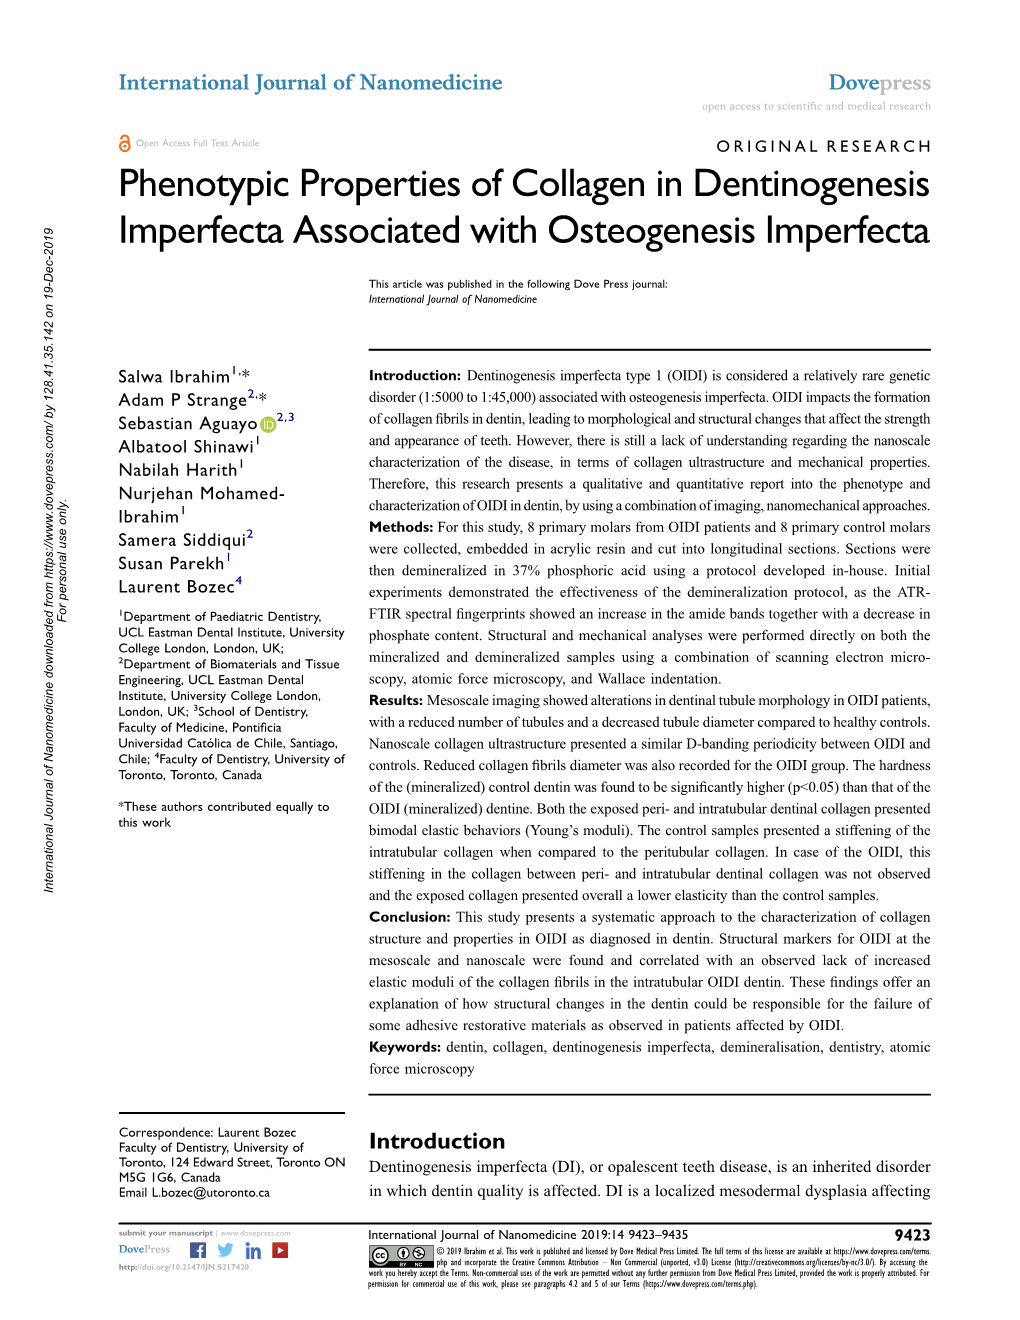 Phenotypic Properties of Collagen in Dentinogenesis Imperfecta Associated with Osteogenesis Imperfecta